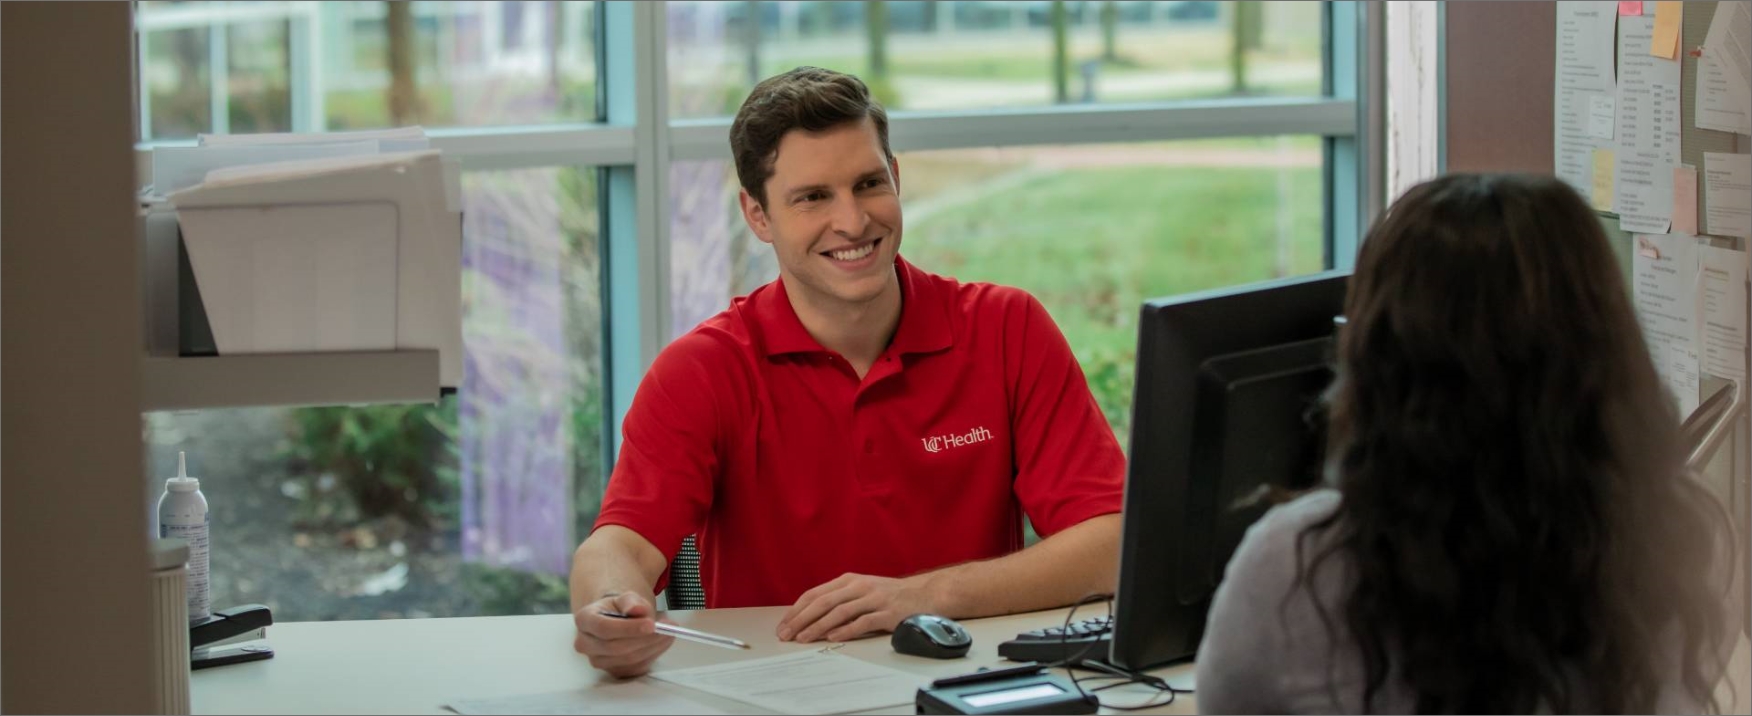  	A young male customer service rep in a red polo assists a female client at his computer station.